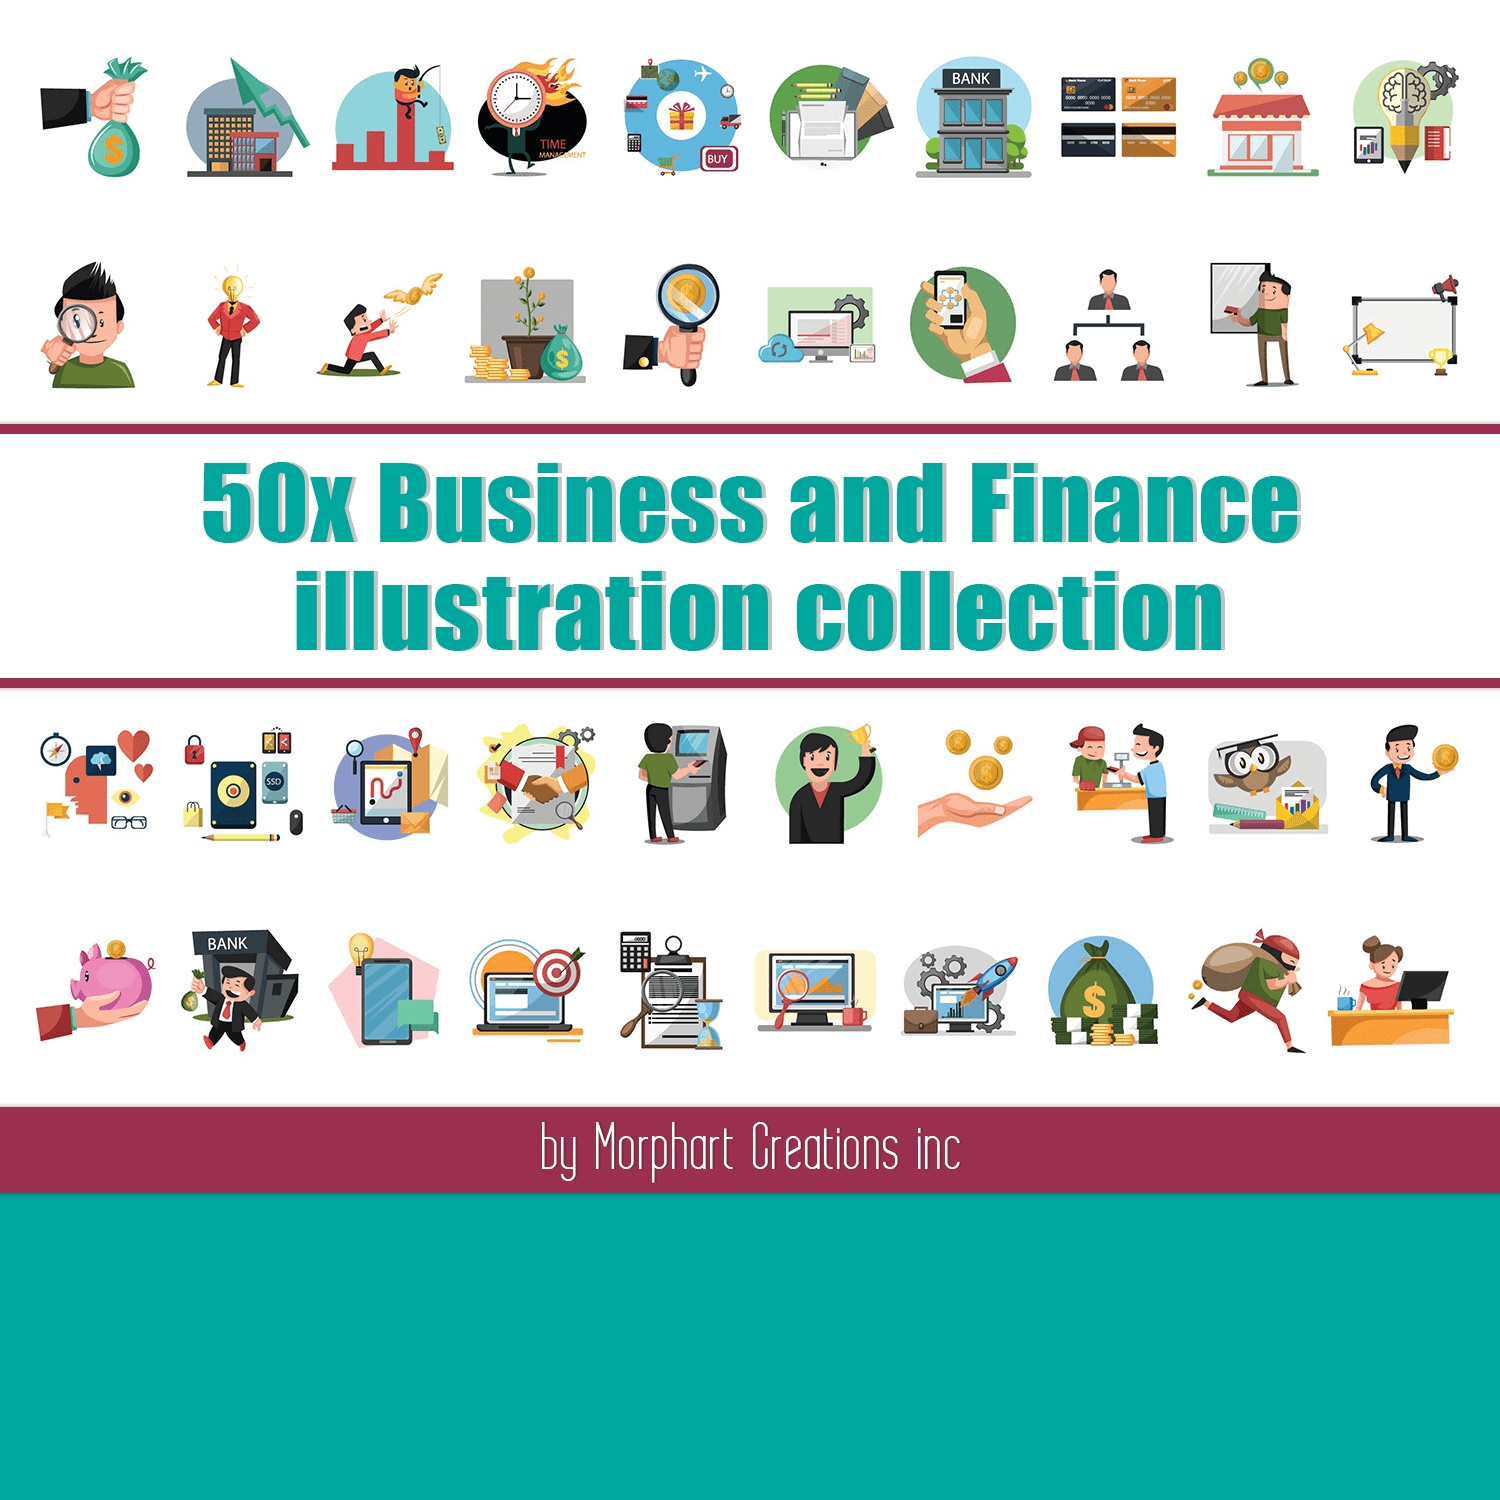 Cover with colorful images on the theme of business and finance.